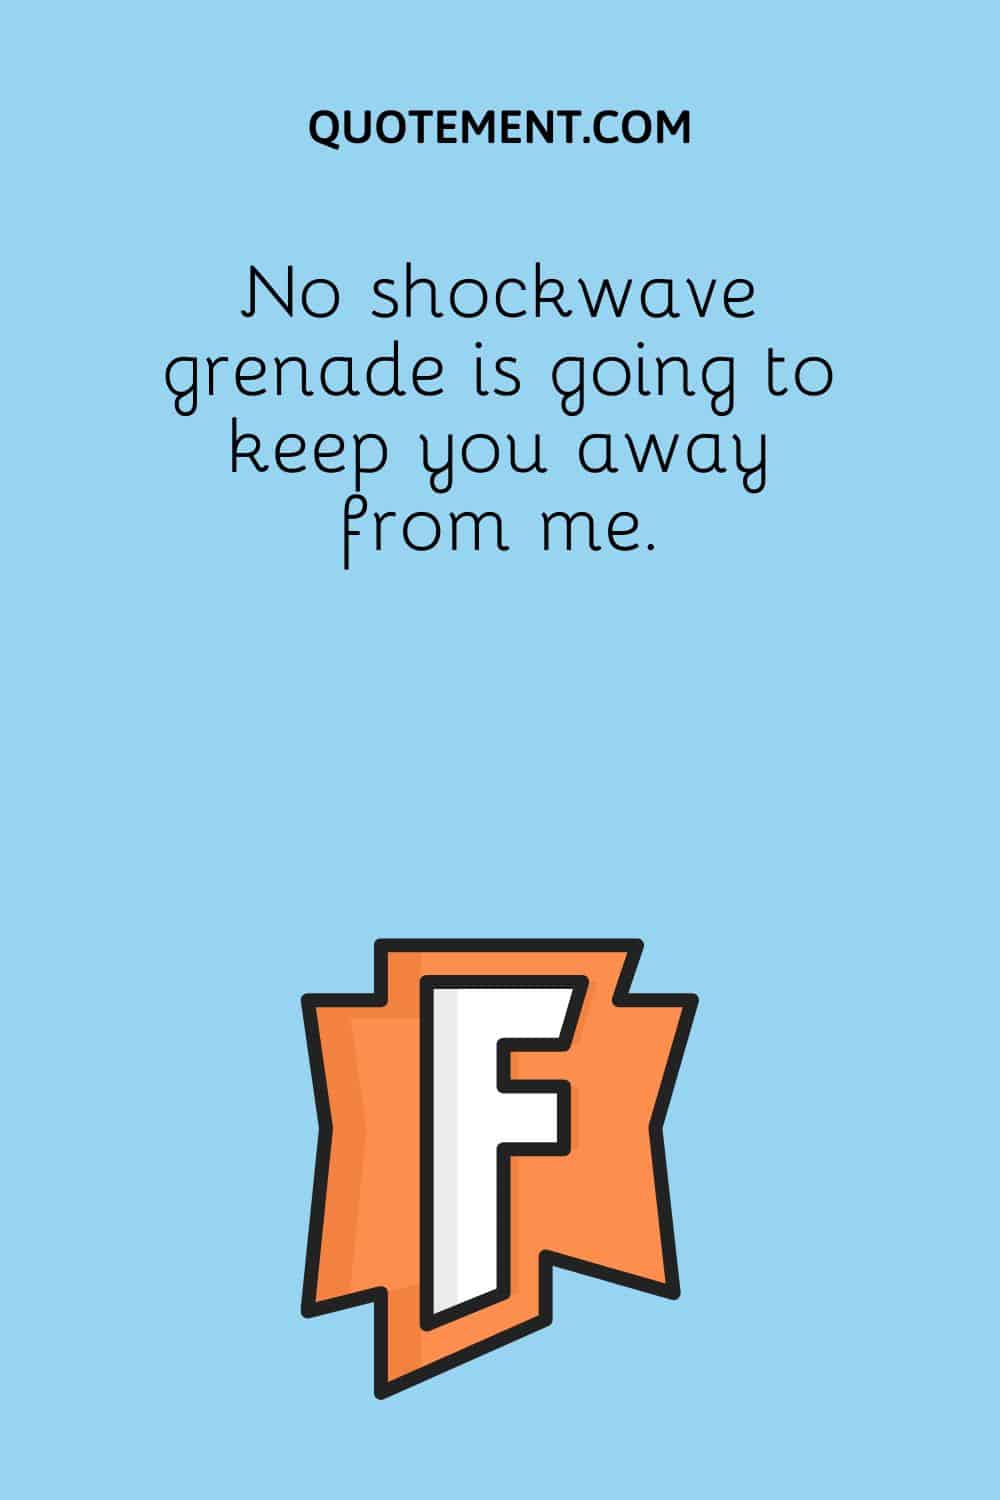 No shockwave grenade is going to keep you away from me.